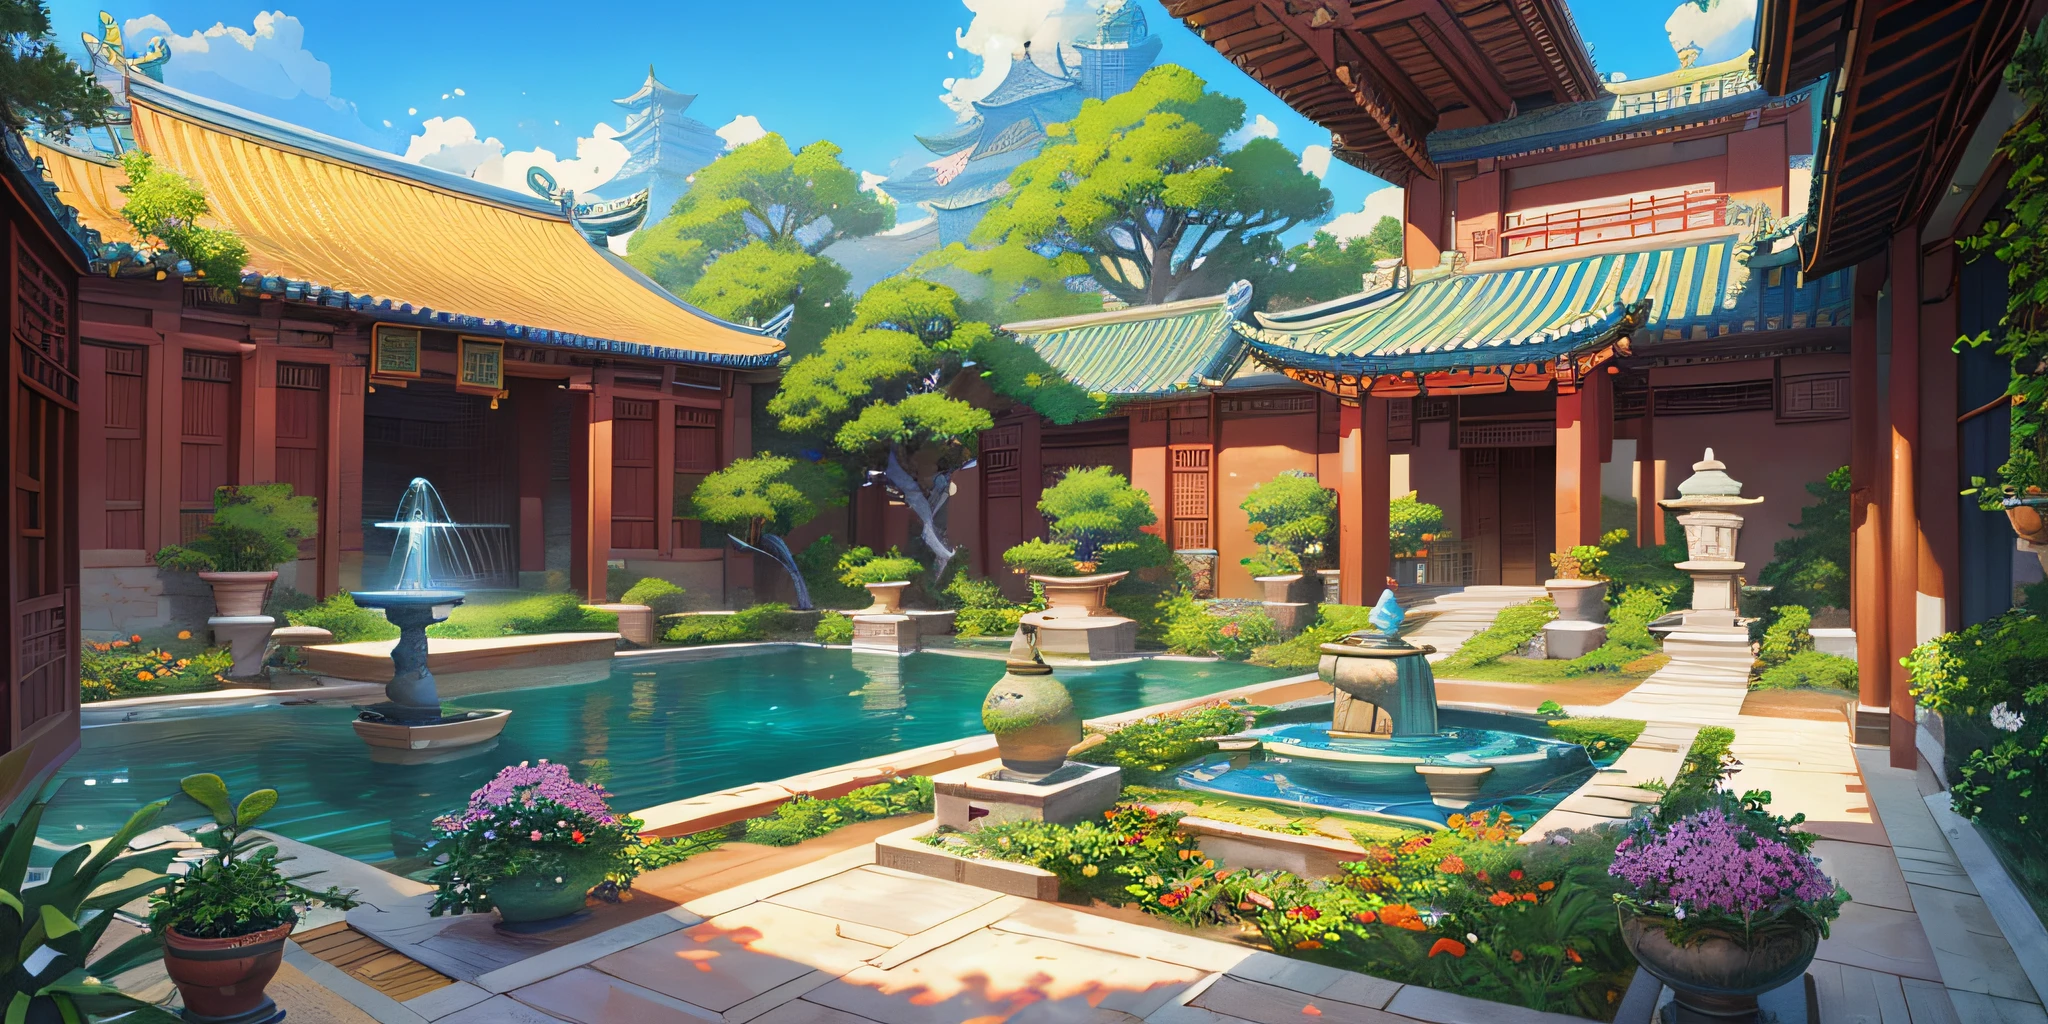 There is a courtyard with fountains and potted plants, arte de fundo, Anime background art, 8k，High quality detailed art, a wide open courtyard in an epic, ross tran. scenery background, highly detailed digital painting, digital painting highly detailed, Zen temple background, highly detailed scenario, Chinese palaces, Beautiful rendering of the Tang Dynasty, A beautiful artwork illustration